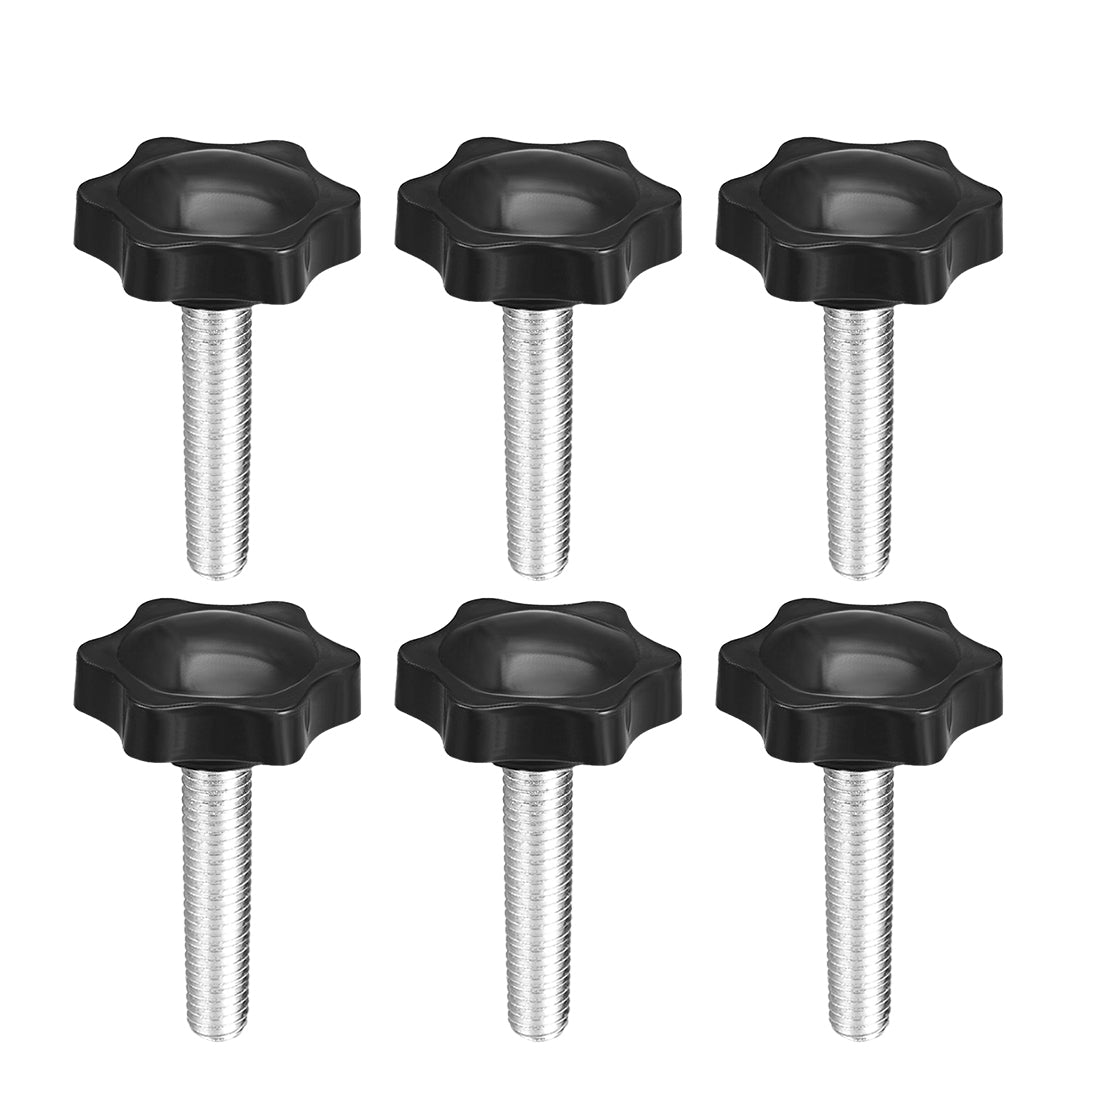 uxcell Uxcell Clamping Screw Knob Dia Plum Hex Shaped Grips Star Knob Male Thread 6pcs